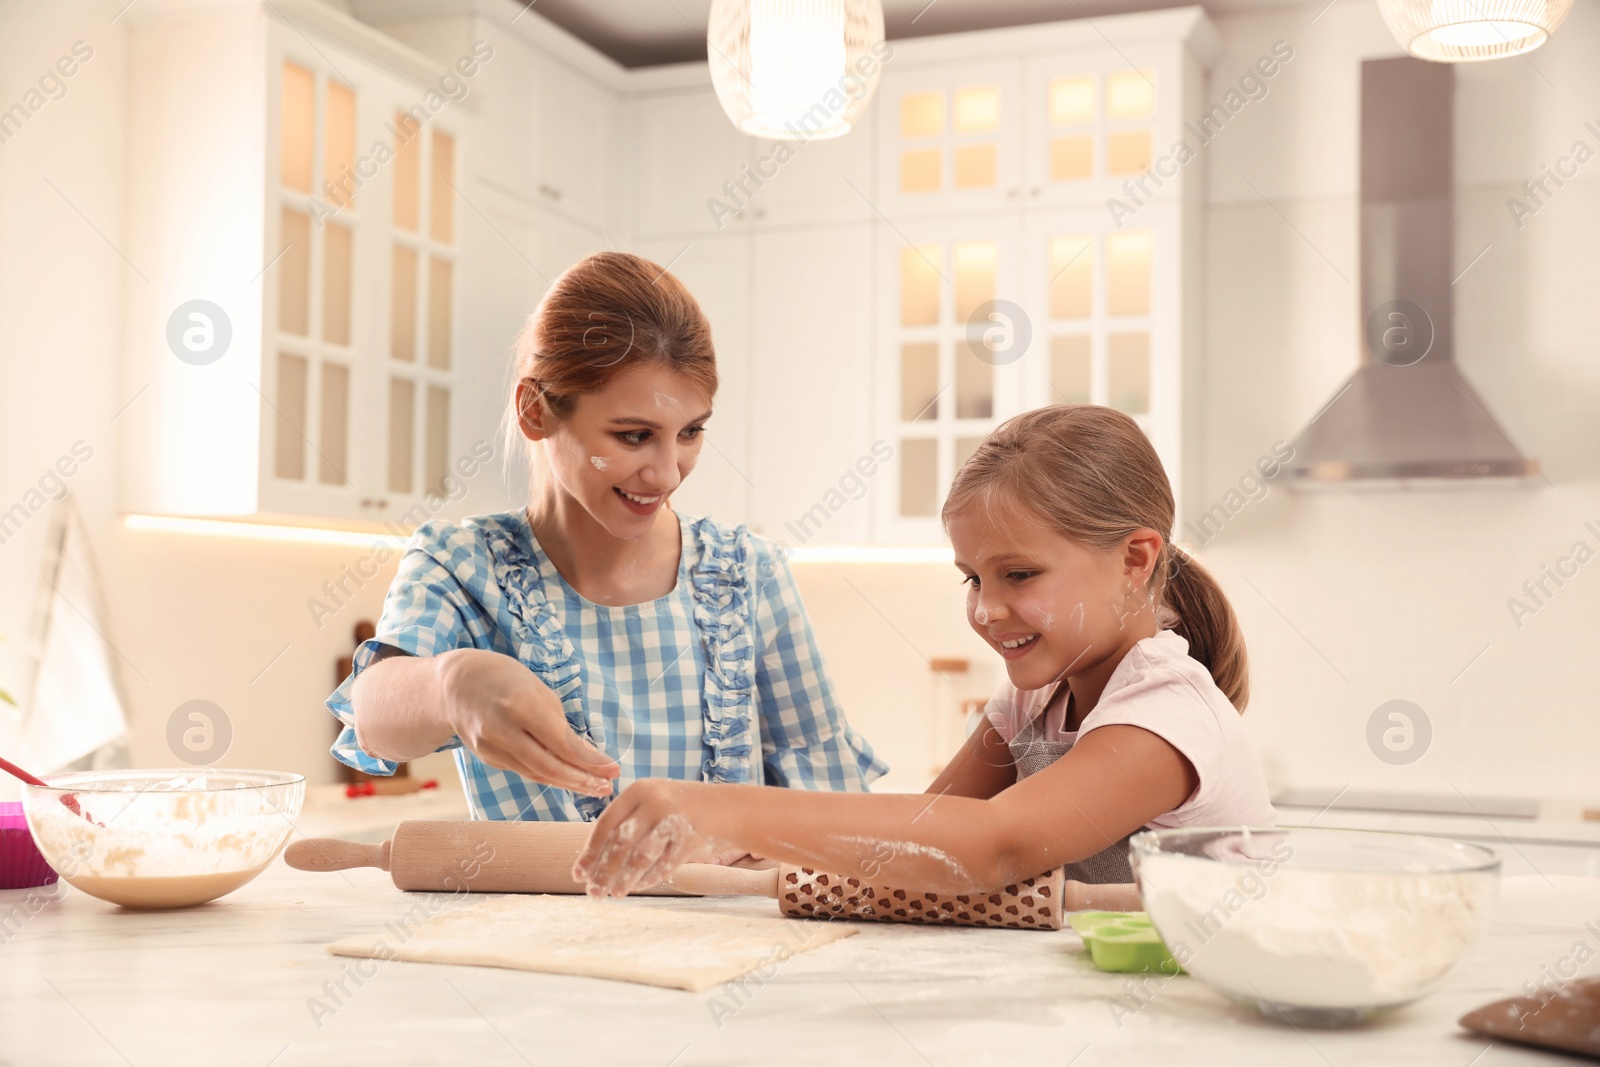 Photo of Mother and daughter rolling dough together in kitchen